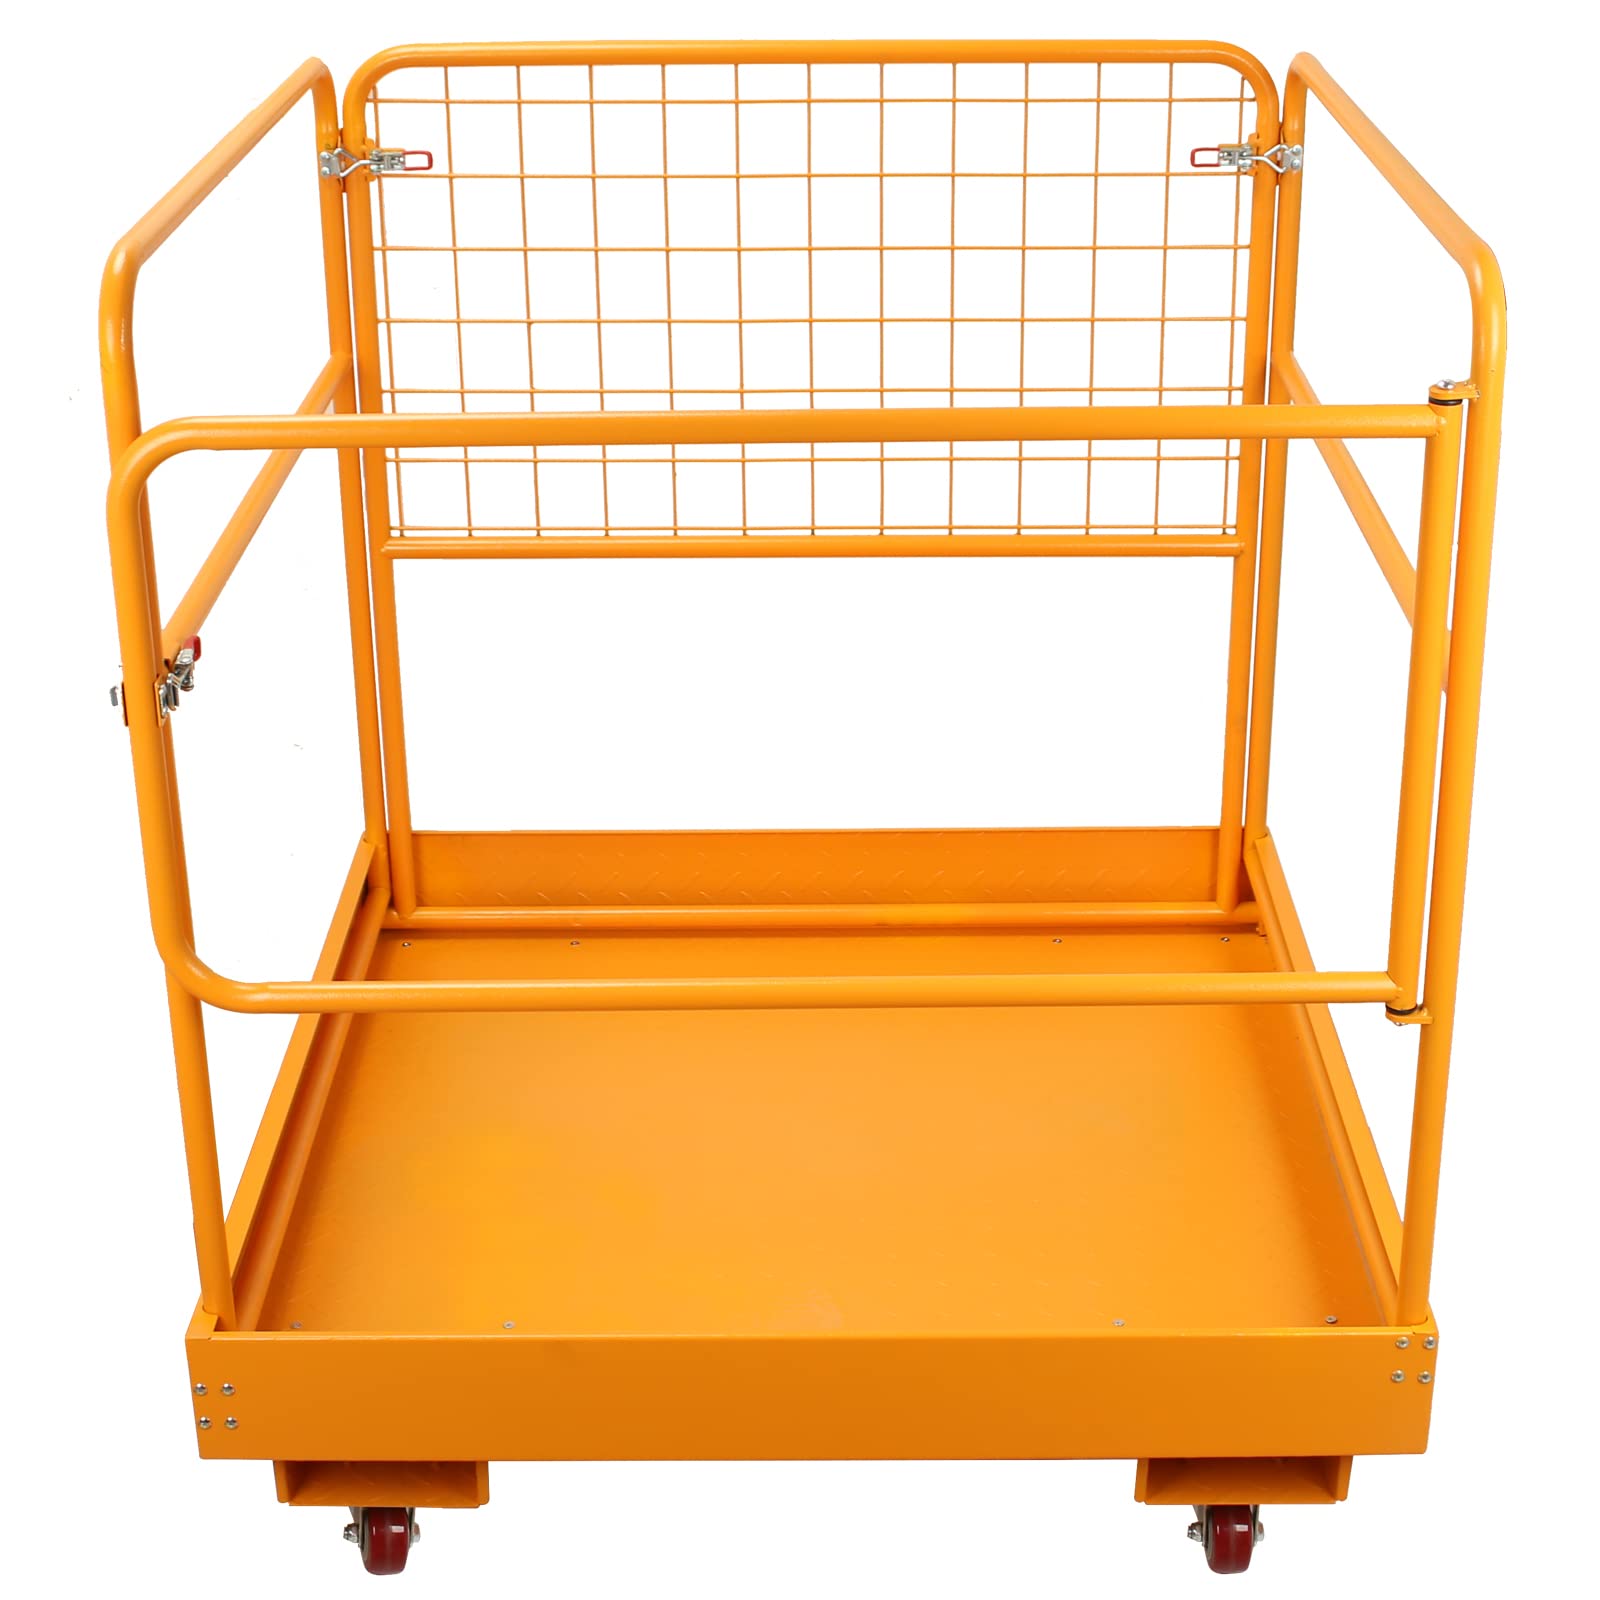 Sidasu Forklift Safety Cage 36X36 Inches Forklift Work Platform 1150Lbs Capacity With 4 Universal Wheels Aerial Platform Collaps